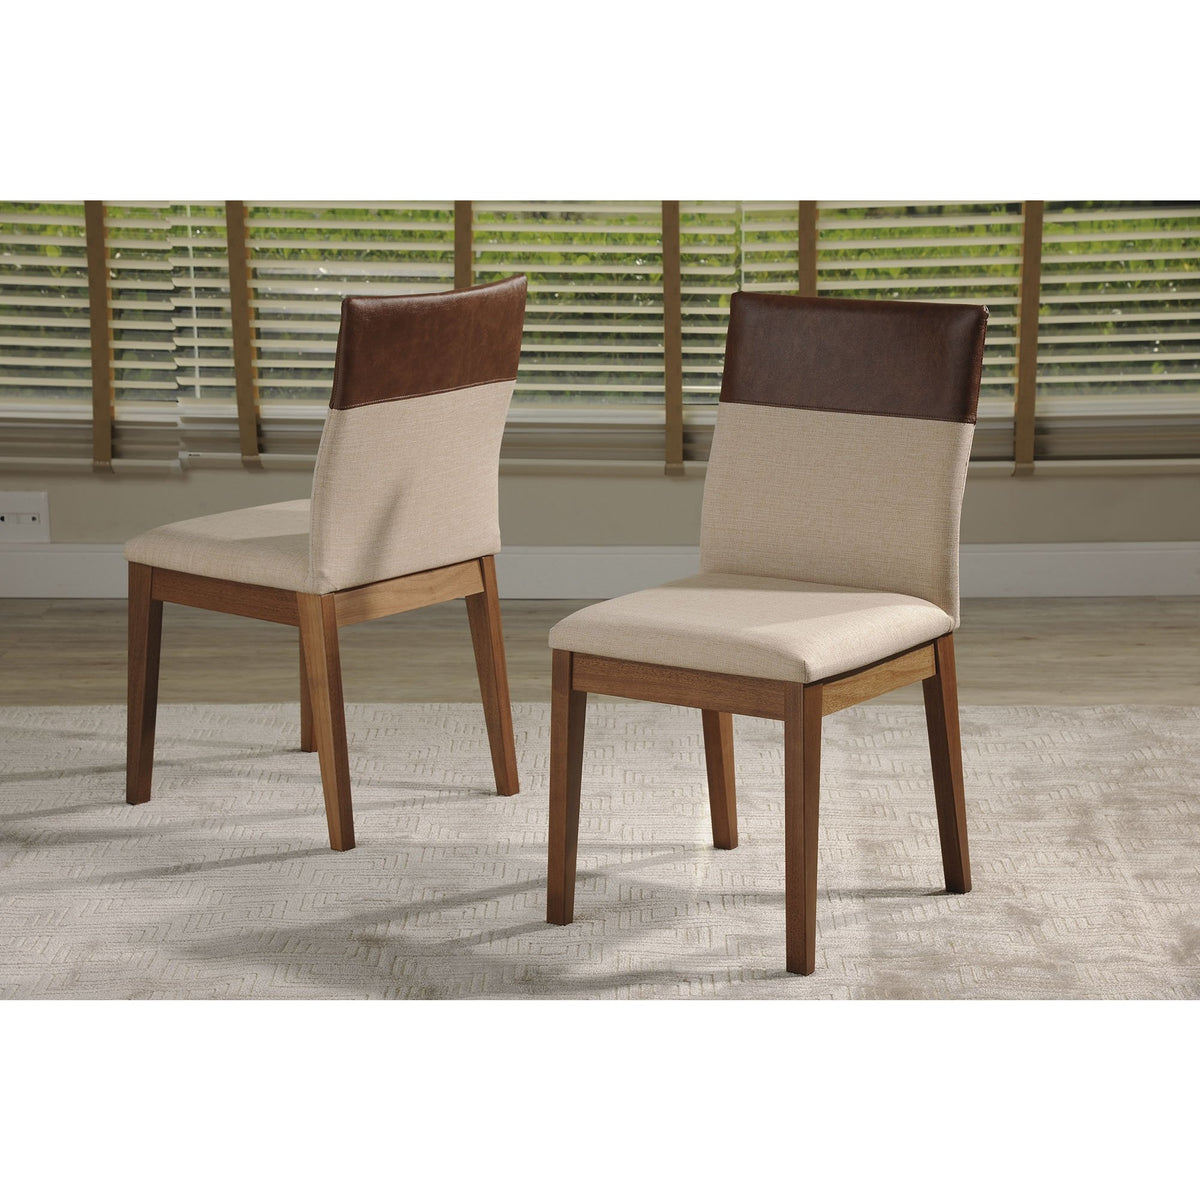 Manhattan Comfort Duke 2-Piece Dining Chair with Synthetic Leather in Dark Beige and Brown-Minimal & Modern